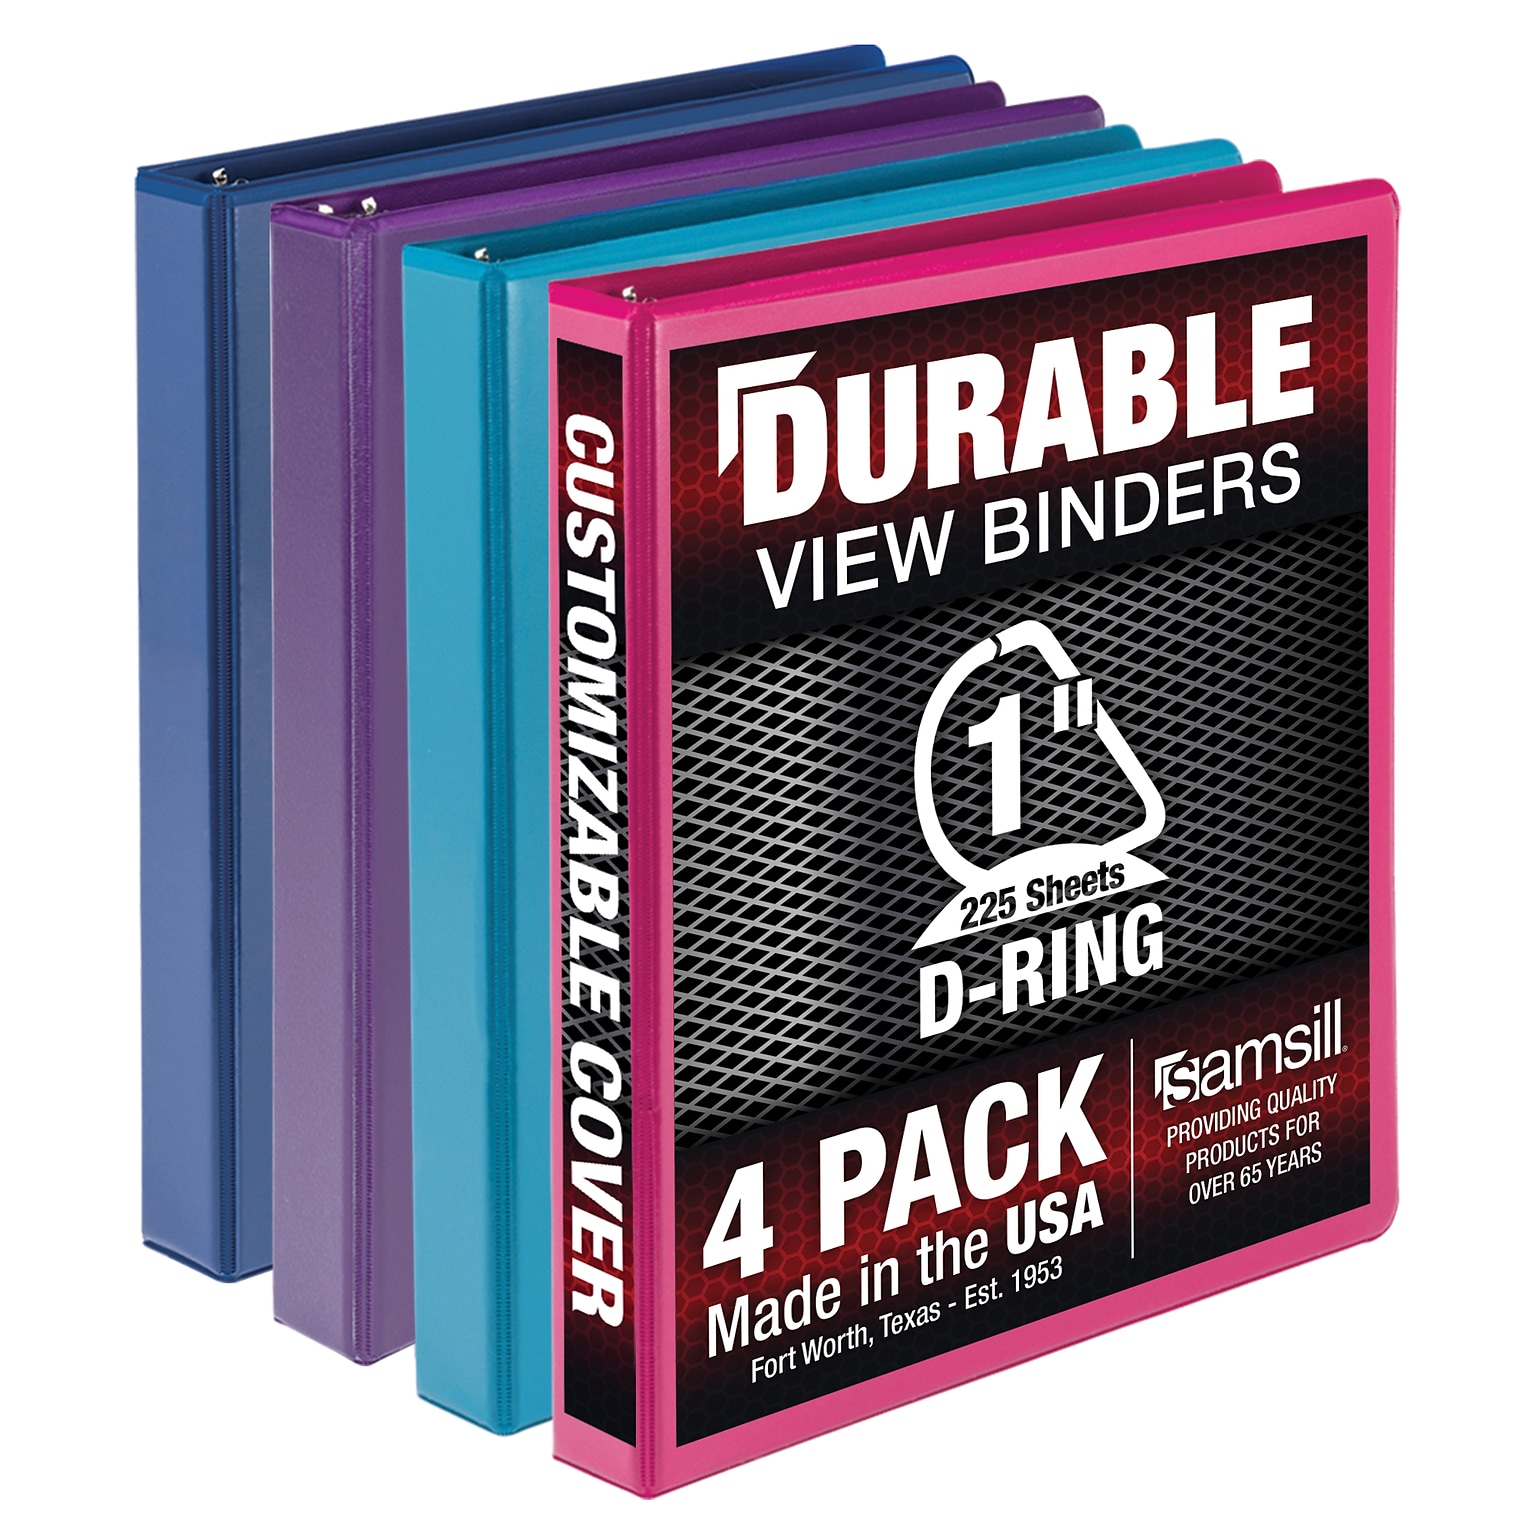 Samsill Durable View Binders 3 D-Ring, Assorted Color, 4 Pack (MP46439)